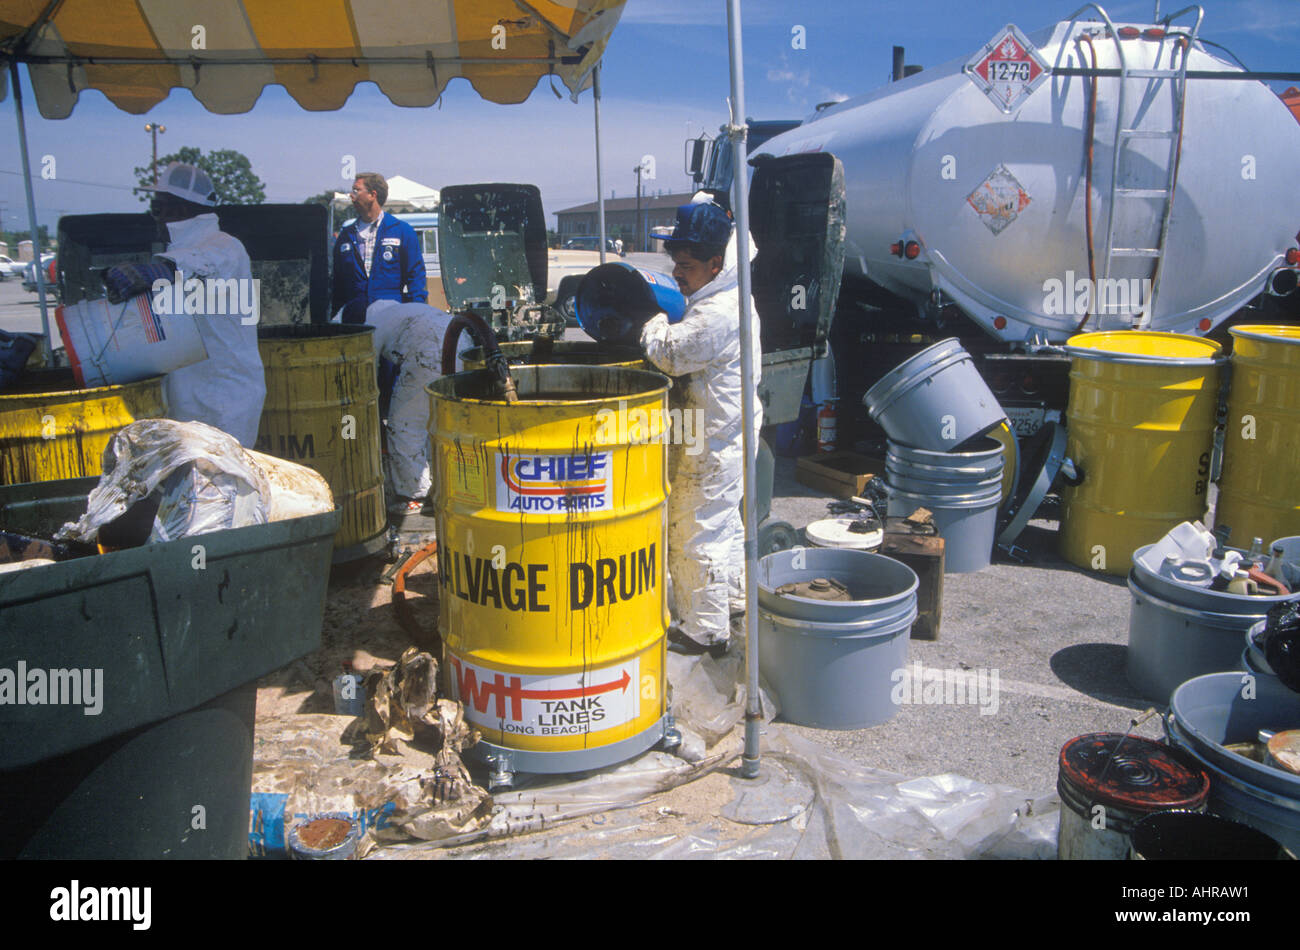 Workers handling toxic household wastes at waste cleanup site on Earth Day at the Unocal plant in Wilmington Los Angeles CA Stock Photo